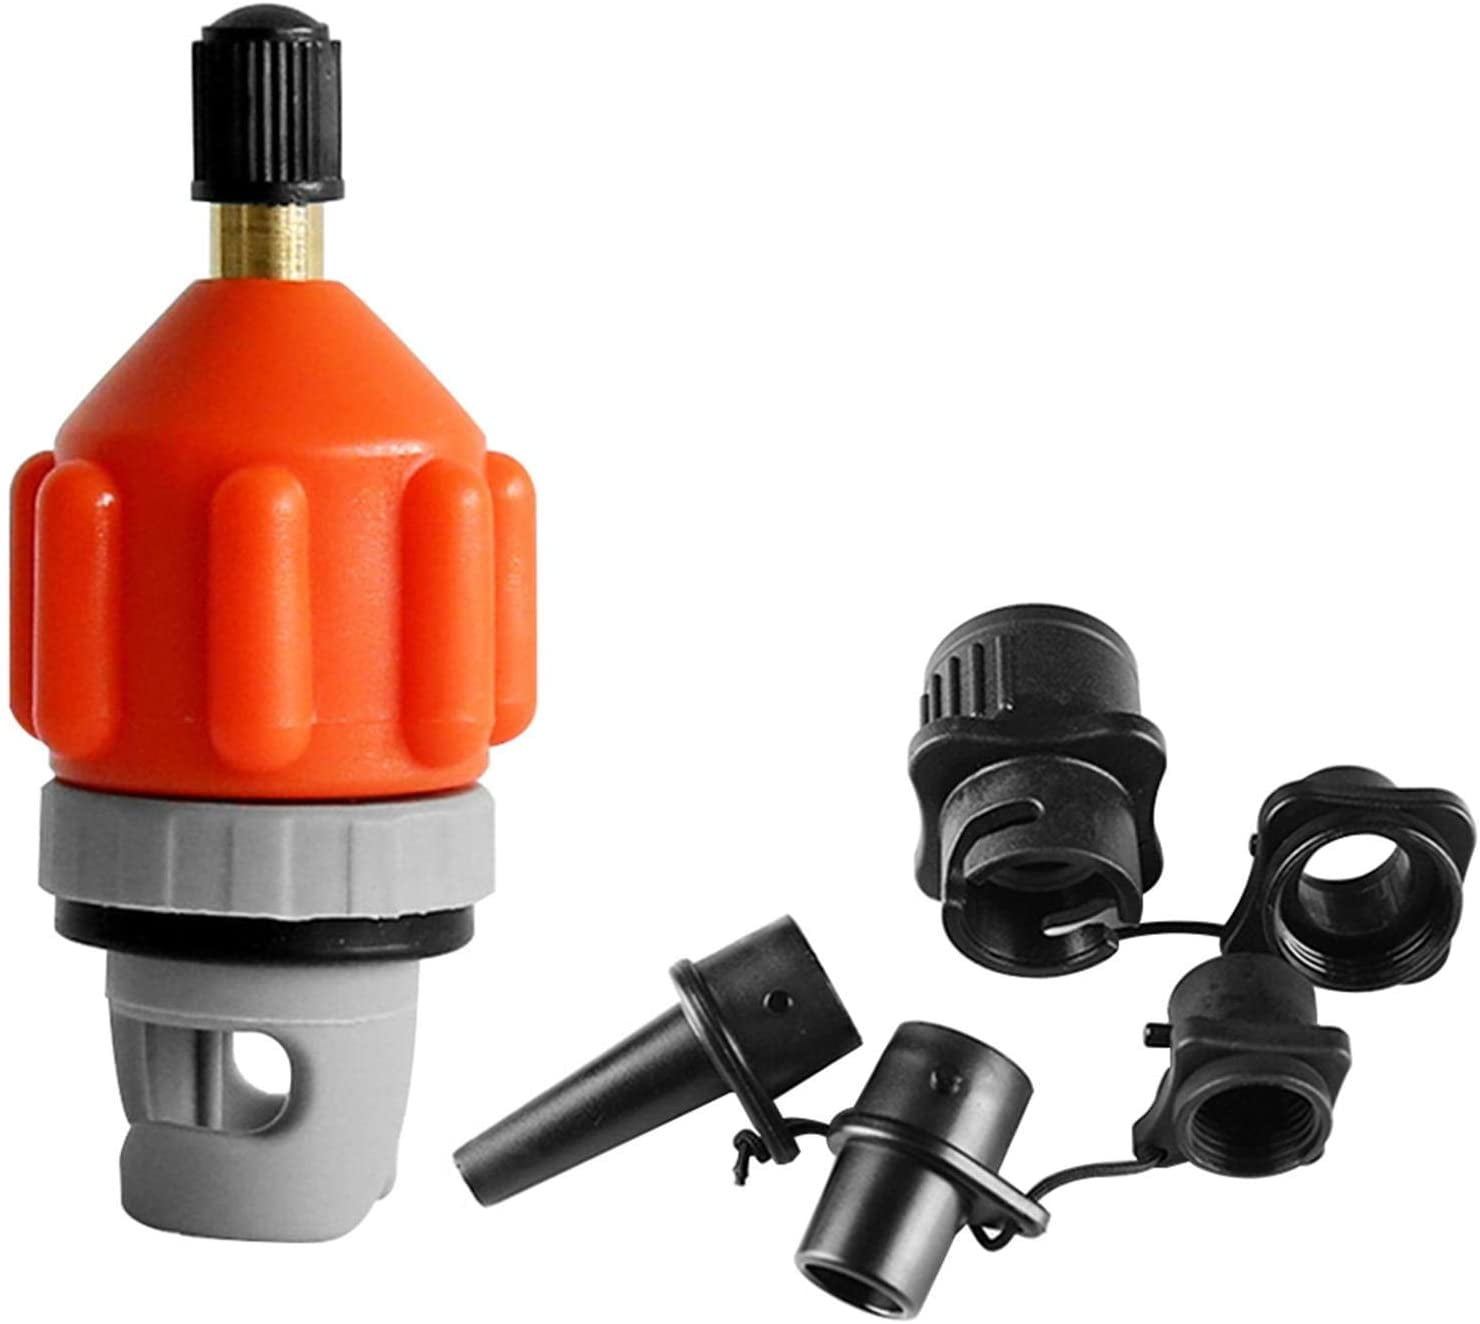 4 Nozzle SUP Pump Adapter for Inflatable Boat Air Valve Adaptor Hose Connector